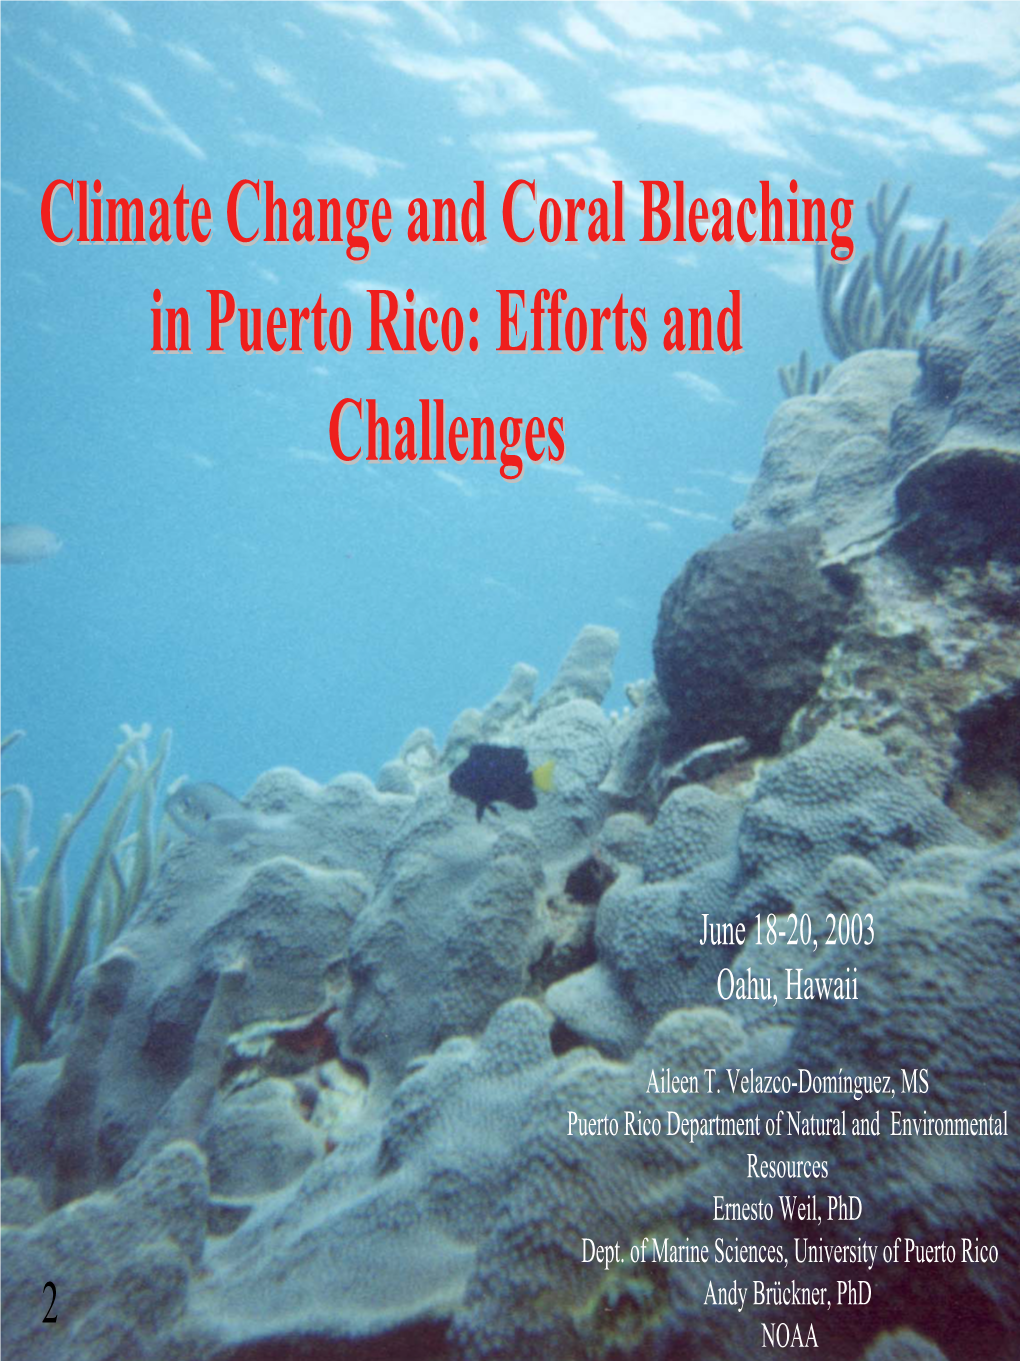 Climate Change and Coral Bleaching in Puerto Rico: Efforts and Challenges